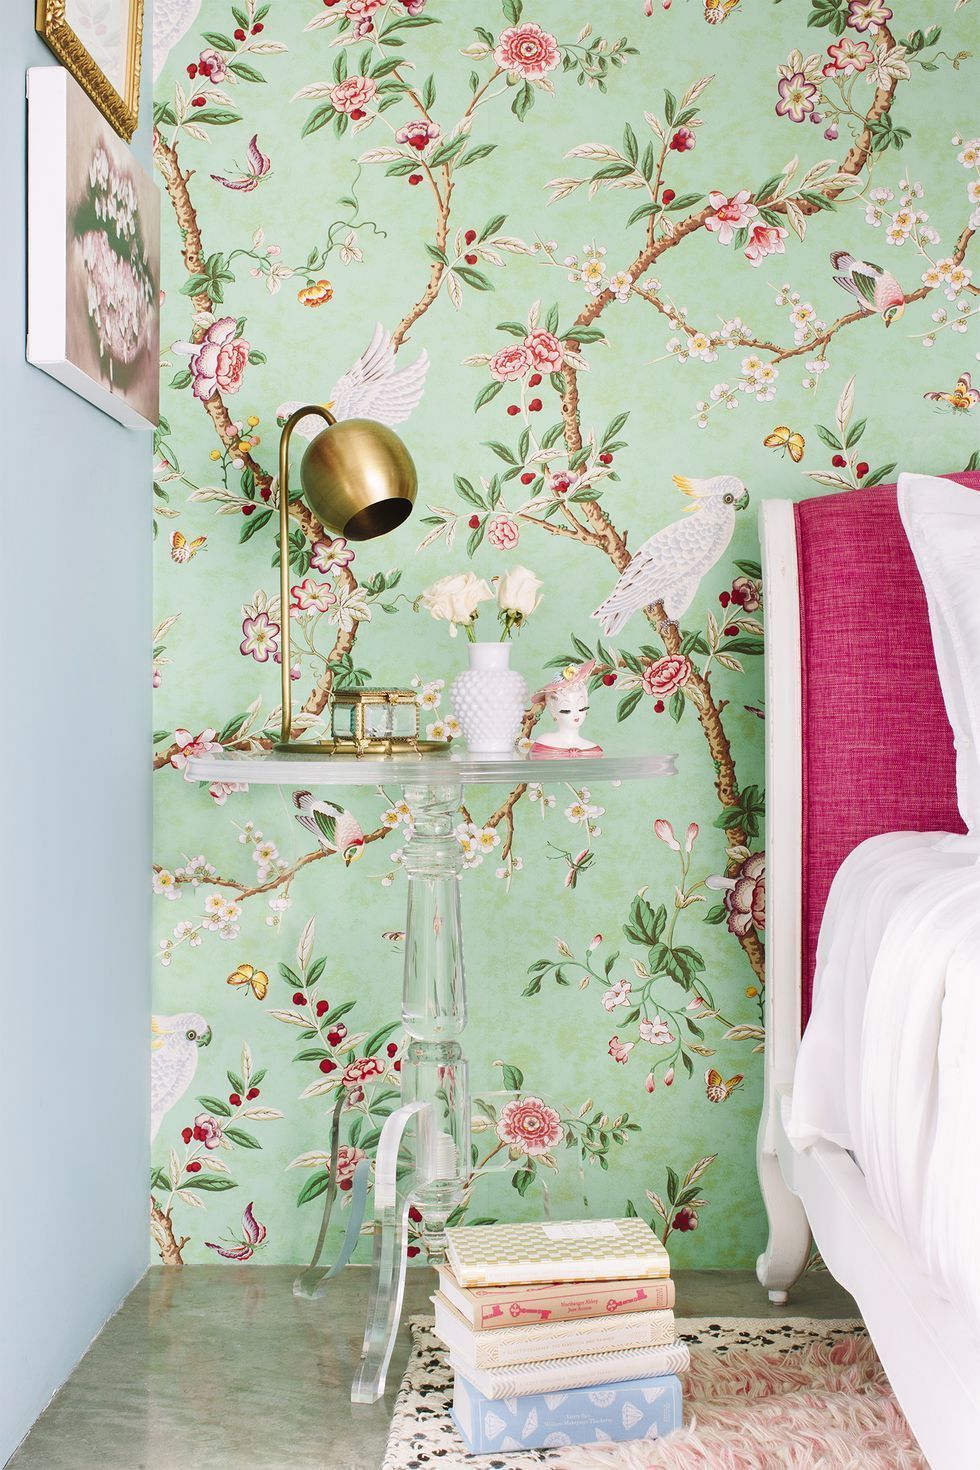 52 Wallpaper Ideas for Every Room and Style